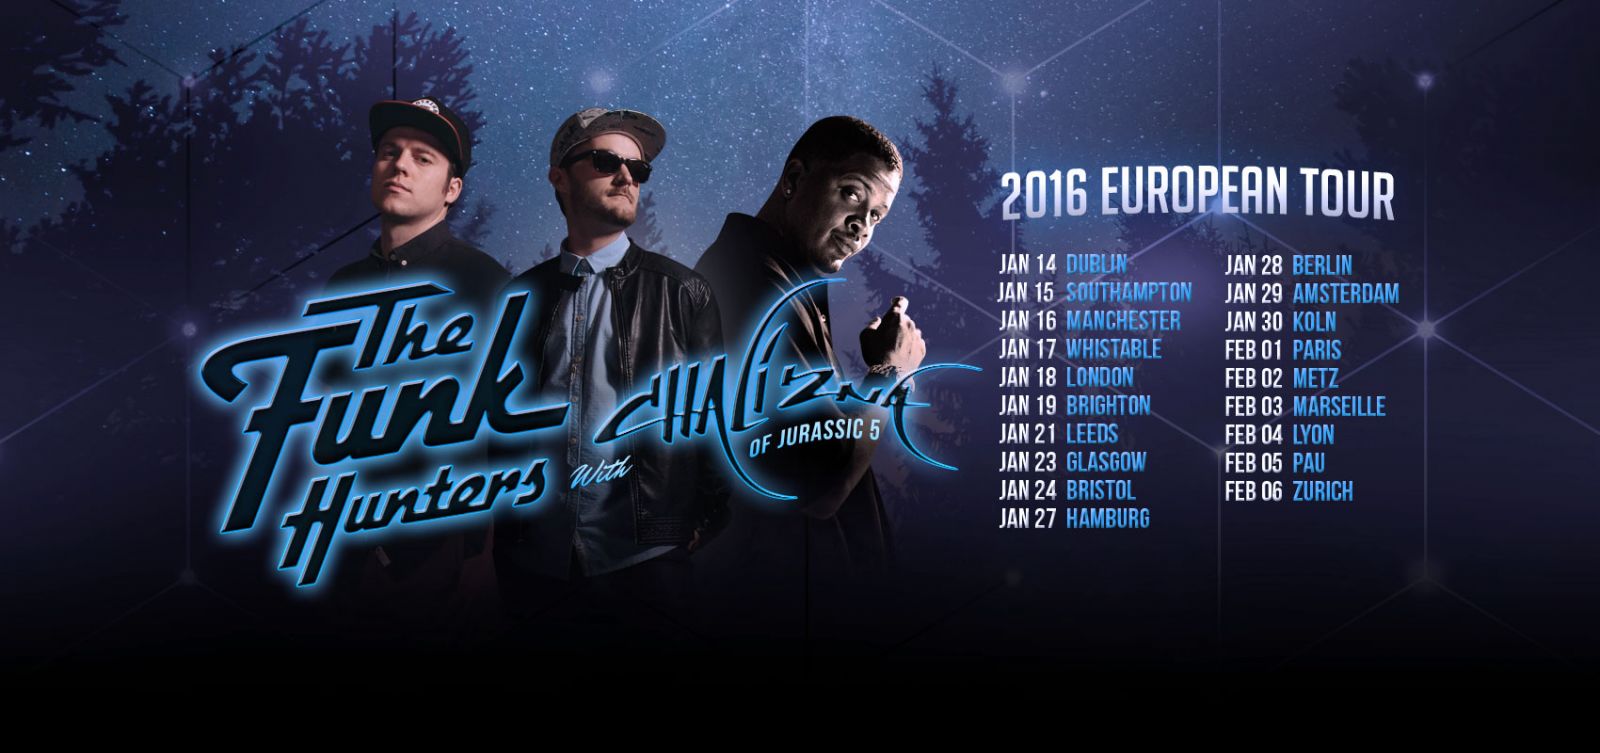 Chali 2na and The Funk Hunters played The Fleece in Bristol on 24 January 2016